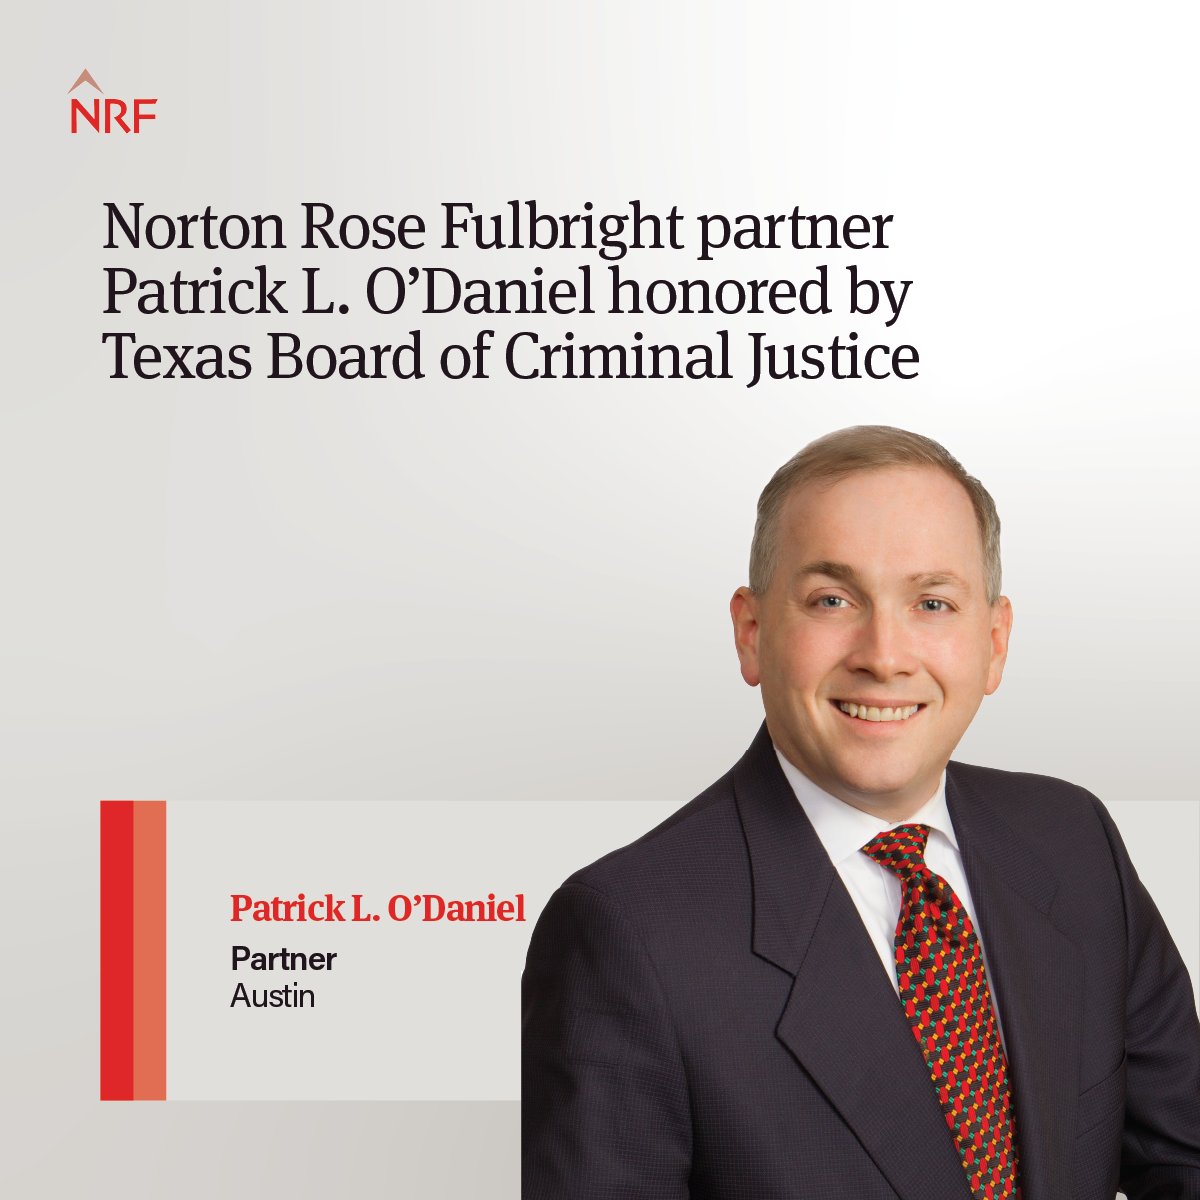 Partner Patrick L. O’Daniel has been recognized for his years of service to the Texas Board of Criminal Justice with the naming of the “Patrick L. O’Daniel Unit” in Gatesville, Texas. ow.ly/He1p50RxjZ4